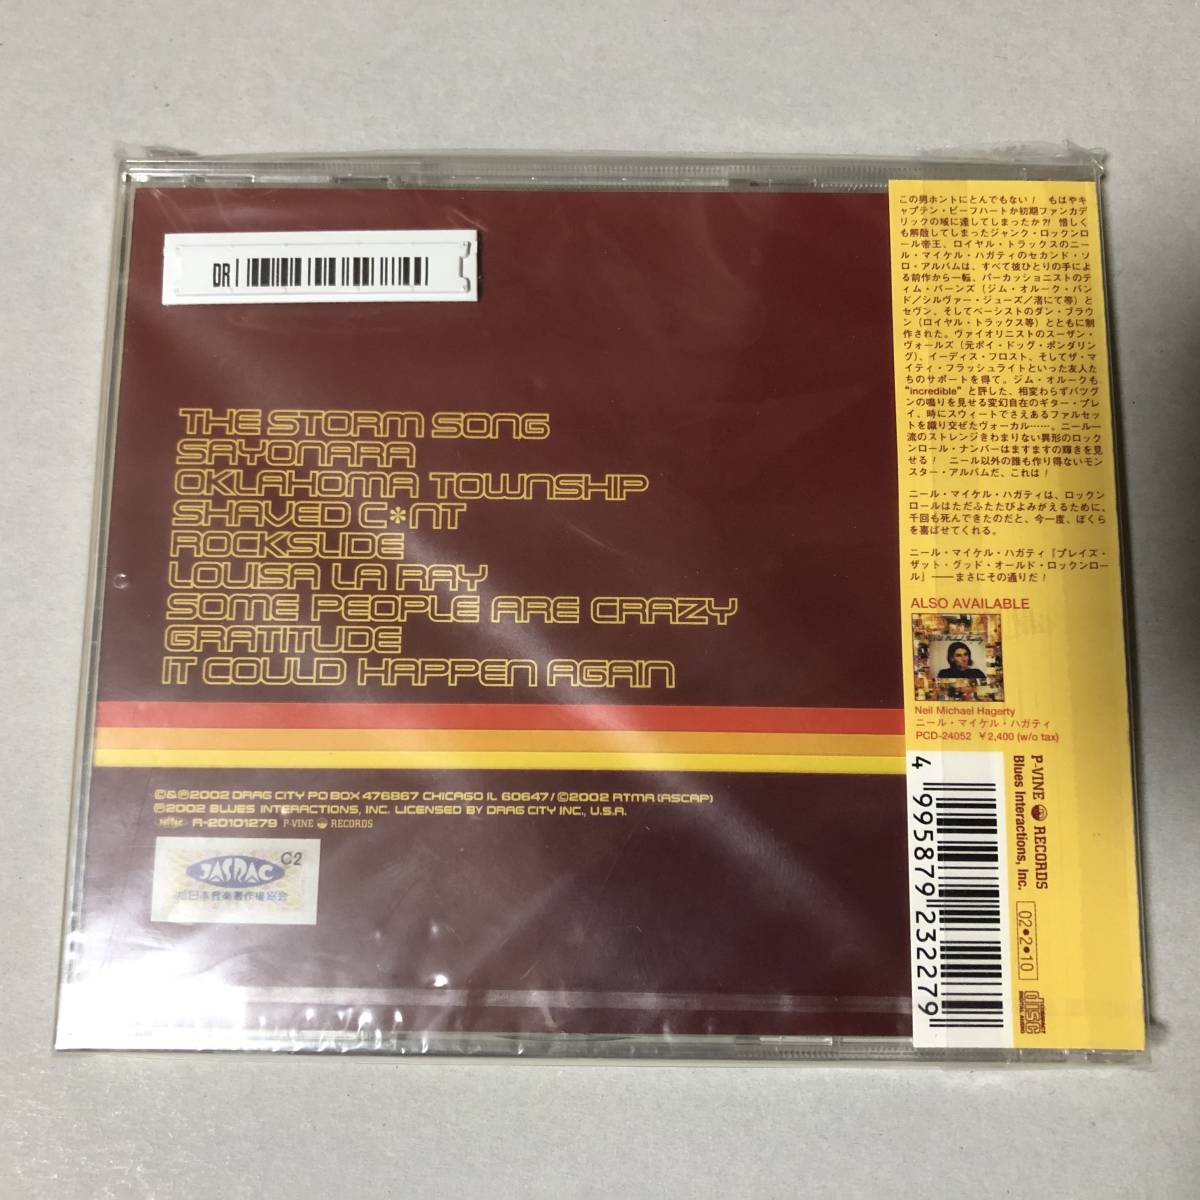 Neil Michael Hagerty CD ④ Plays Royal Trux The Howling Hex ガレージ サイケ ロック ポップ_画像2